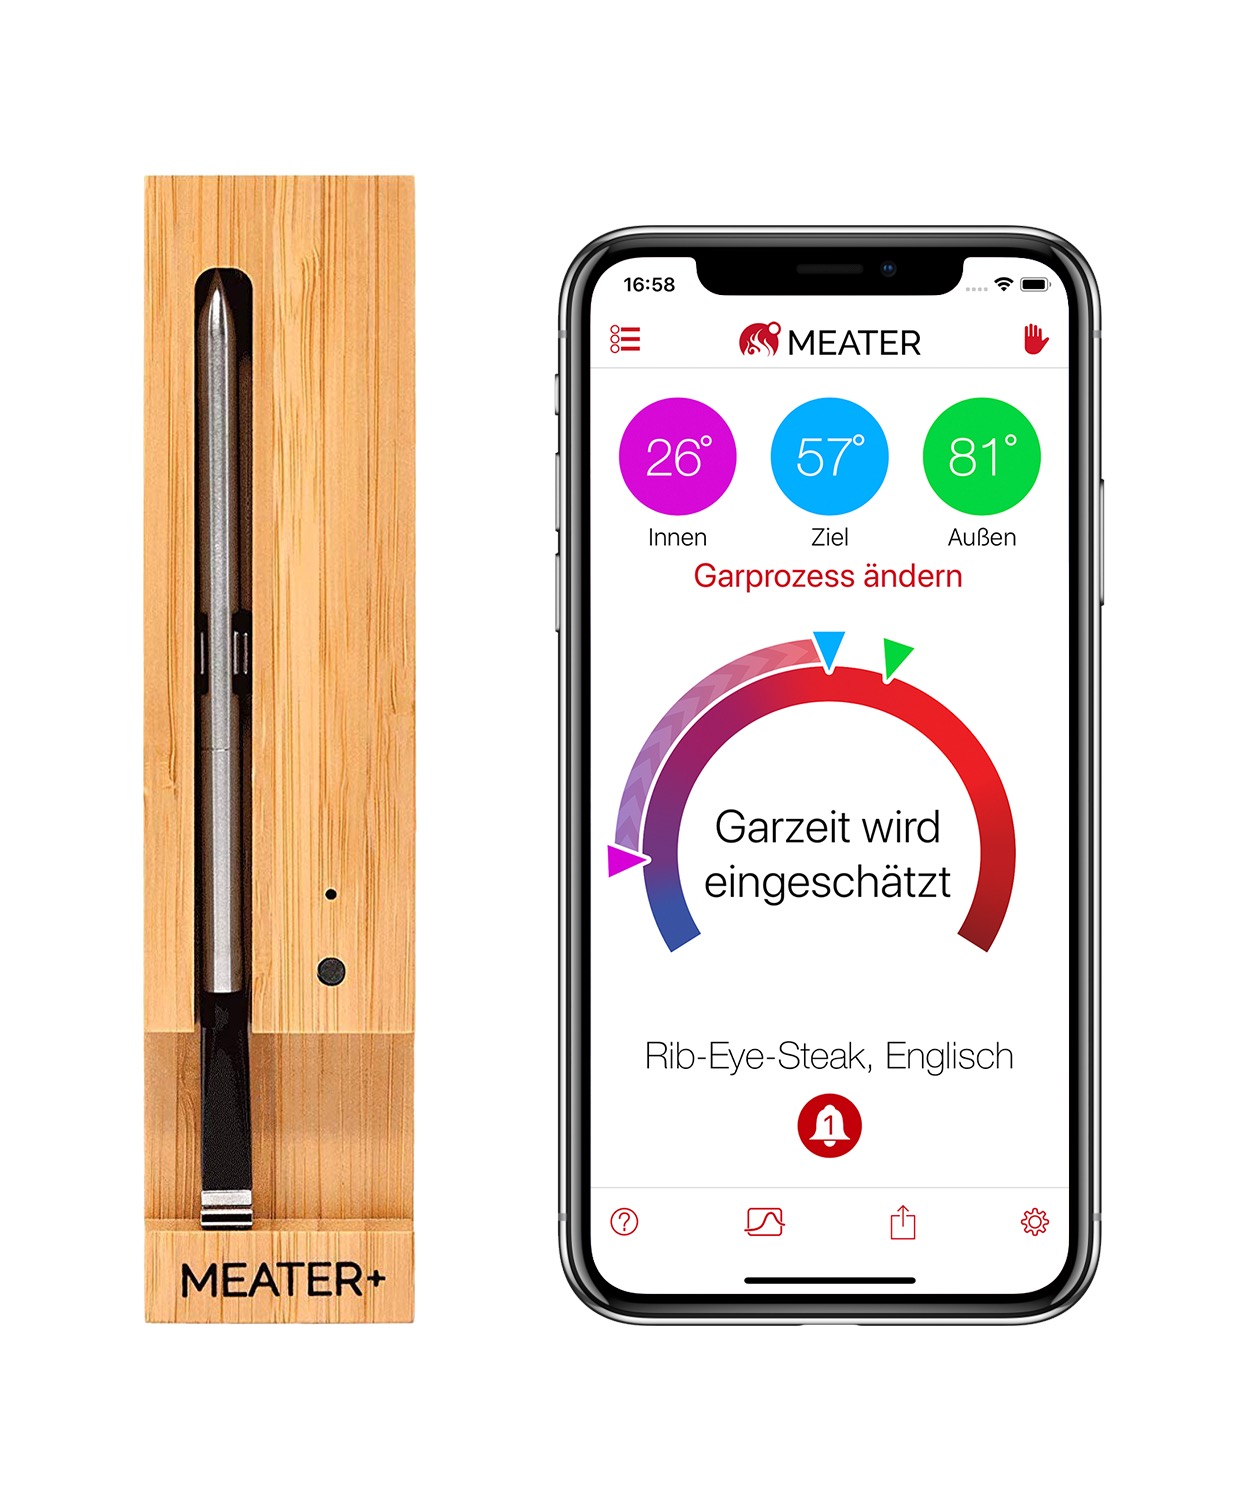 ApptionLabs Meater+